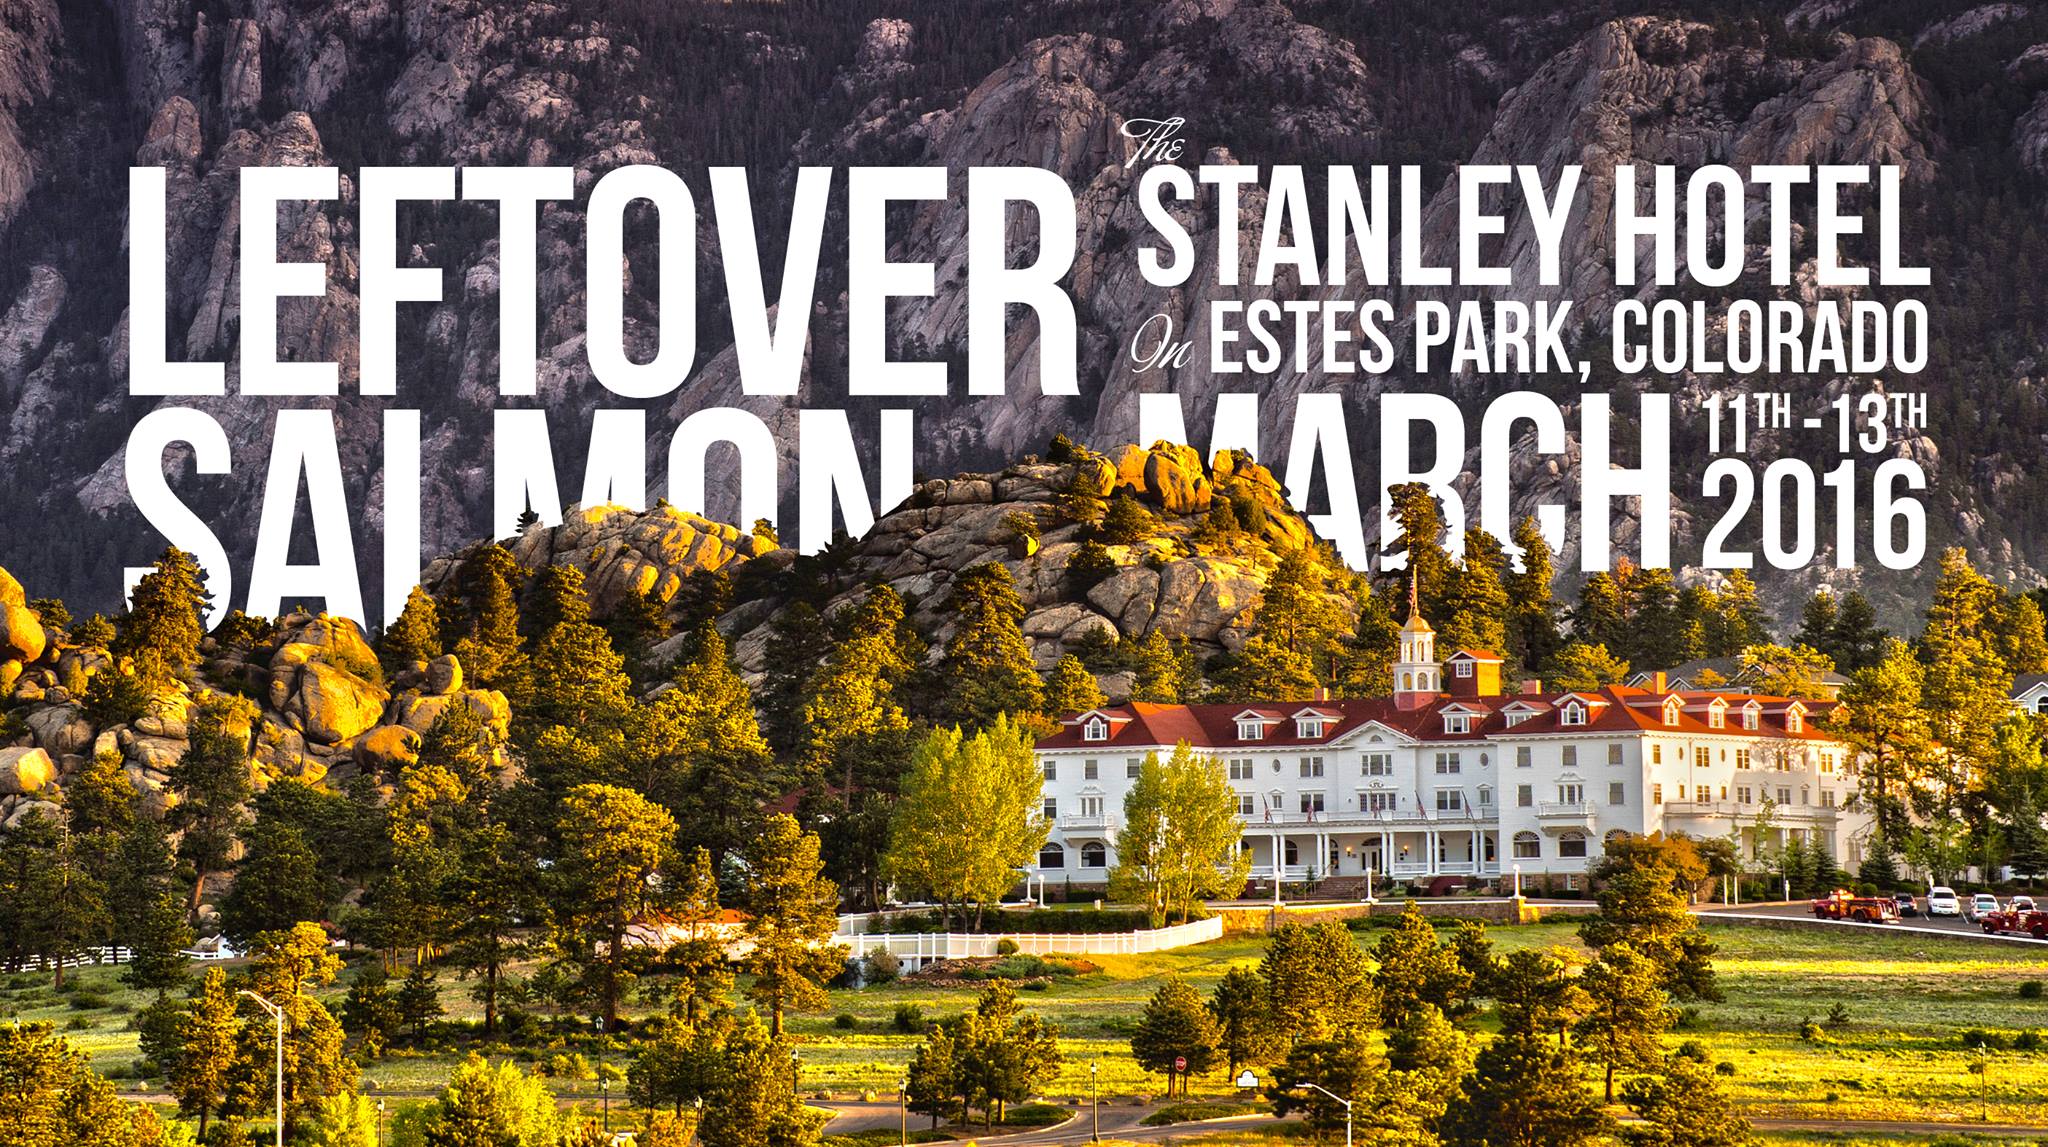 Leftover Salmon SOLD OUT Stanley Hotel Run